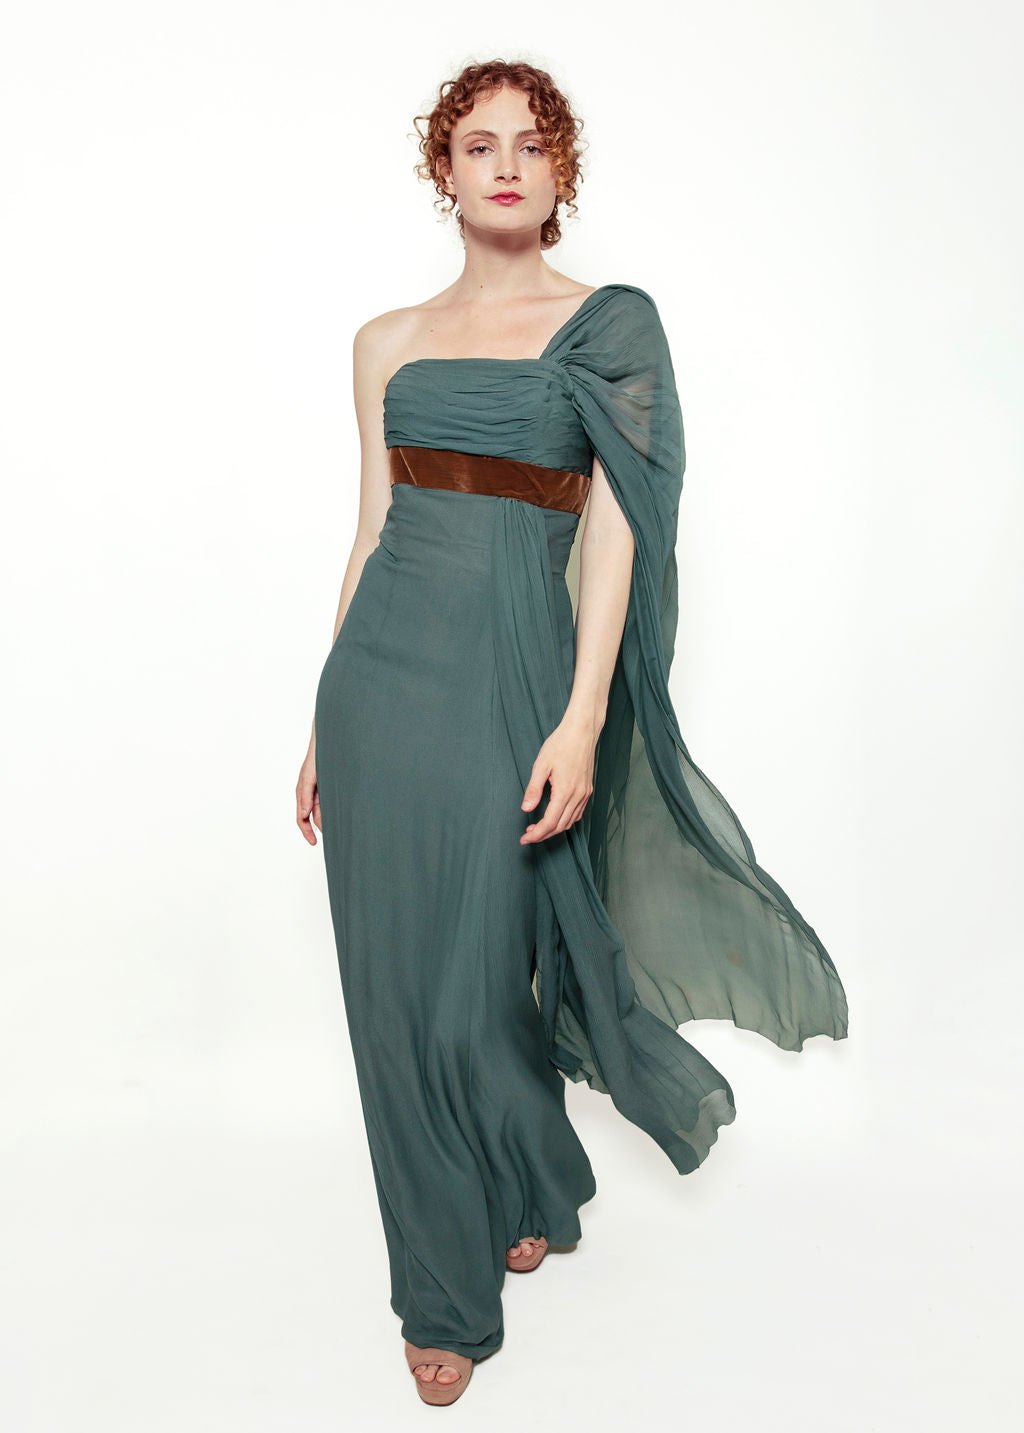 Custom Couture One Shoulder Chiffon Gown